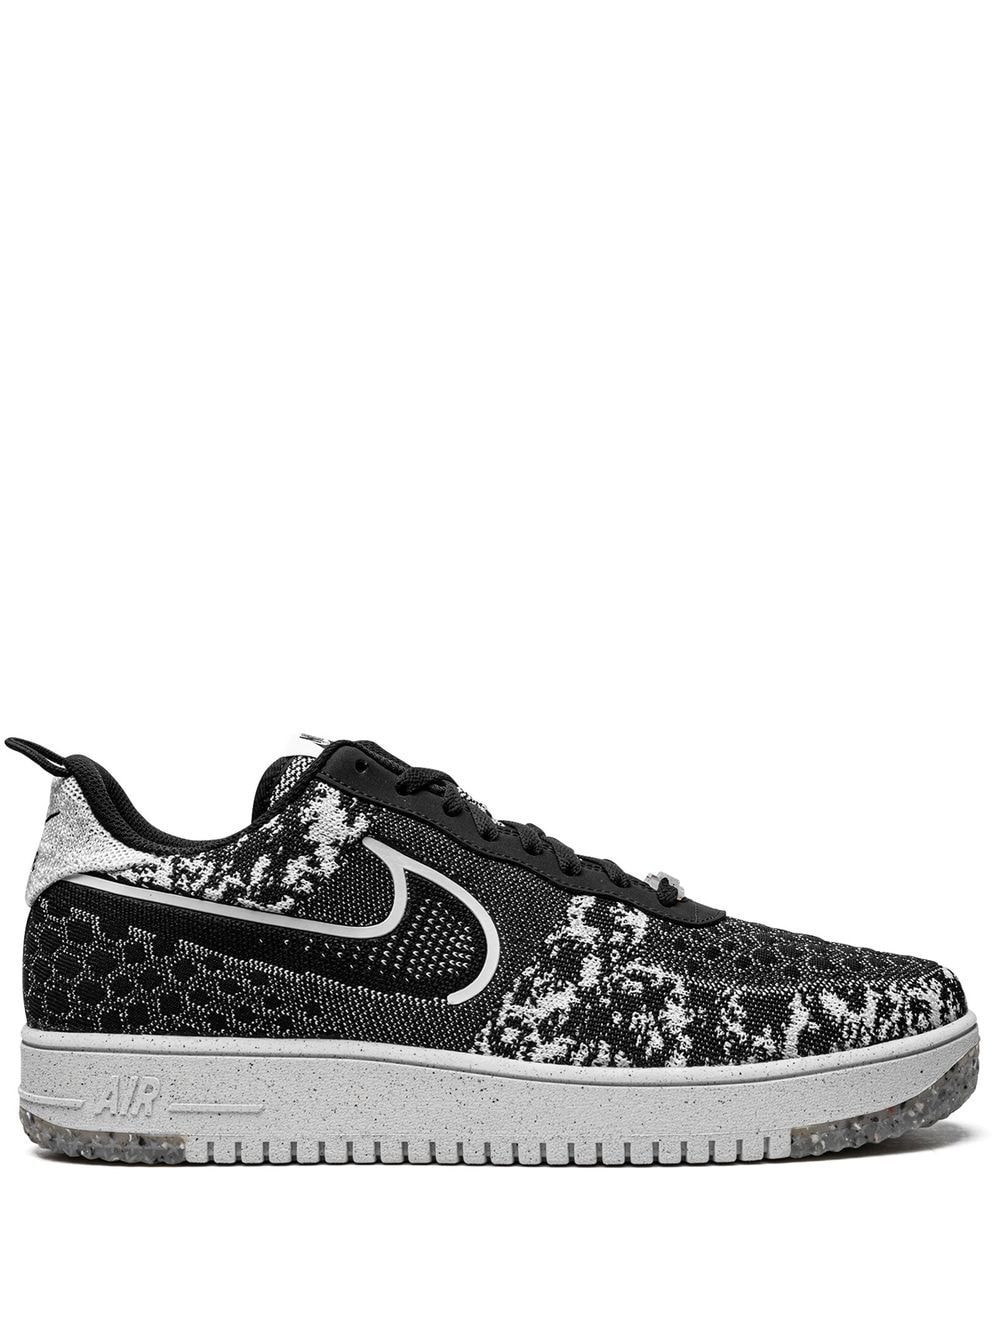 Air Force 1 Crater Flyknit "Black/White" sneakers - 1